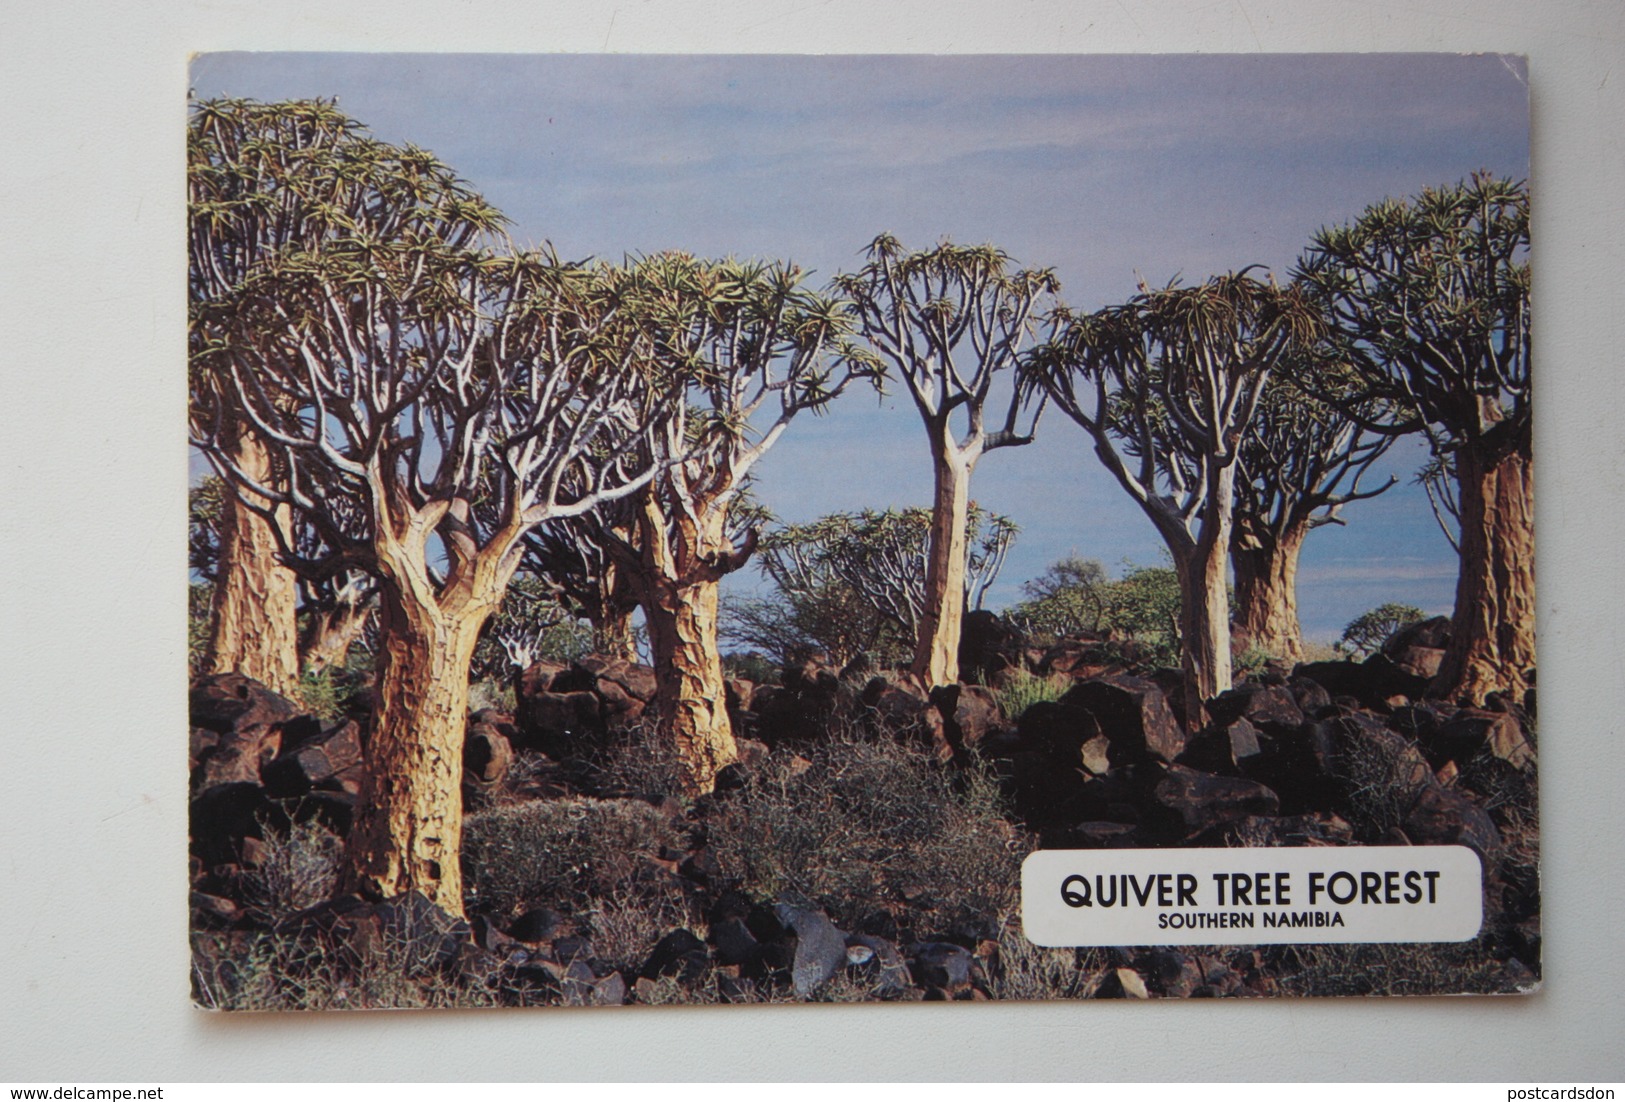 AFRICA-NAMIBIA: QUIVER TREE FOREST. SOUTHERN NAMIBIA - Old Postcard - Uganda Stamp - Namibia